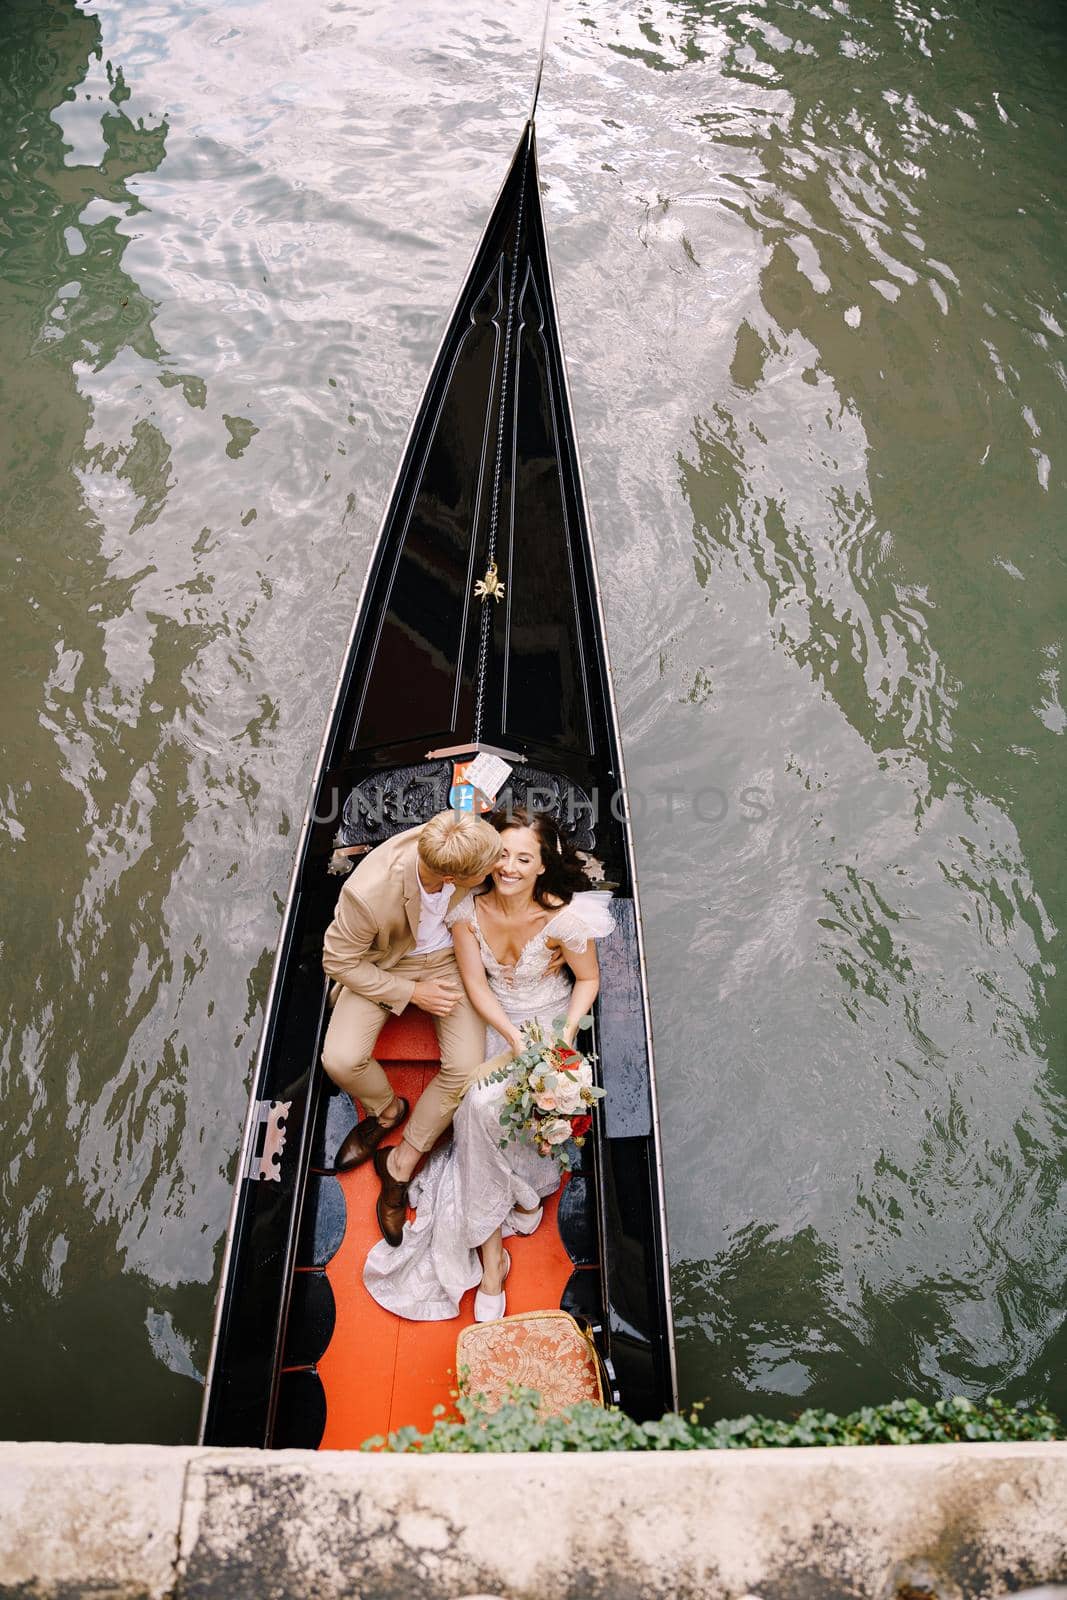 Italy wedding in Venice. A gondolier rolls a bride and groom in a classic wooden gondola along a narrow Venetian canal. Newlyweds are sitting in a boat on the background of ancient buildings. by Nadtochiy